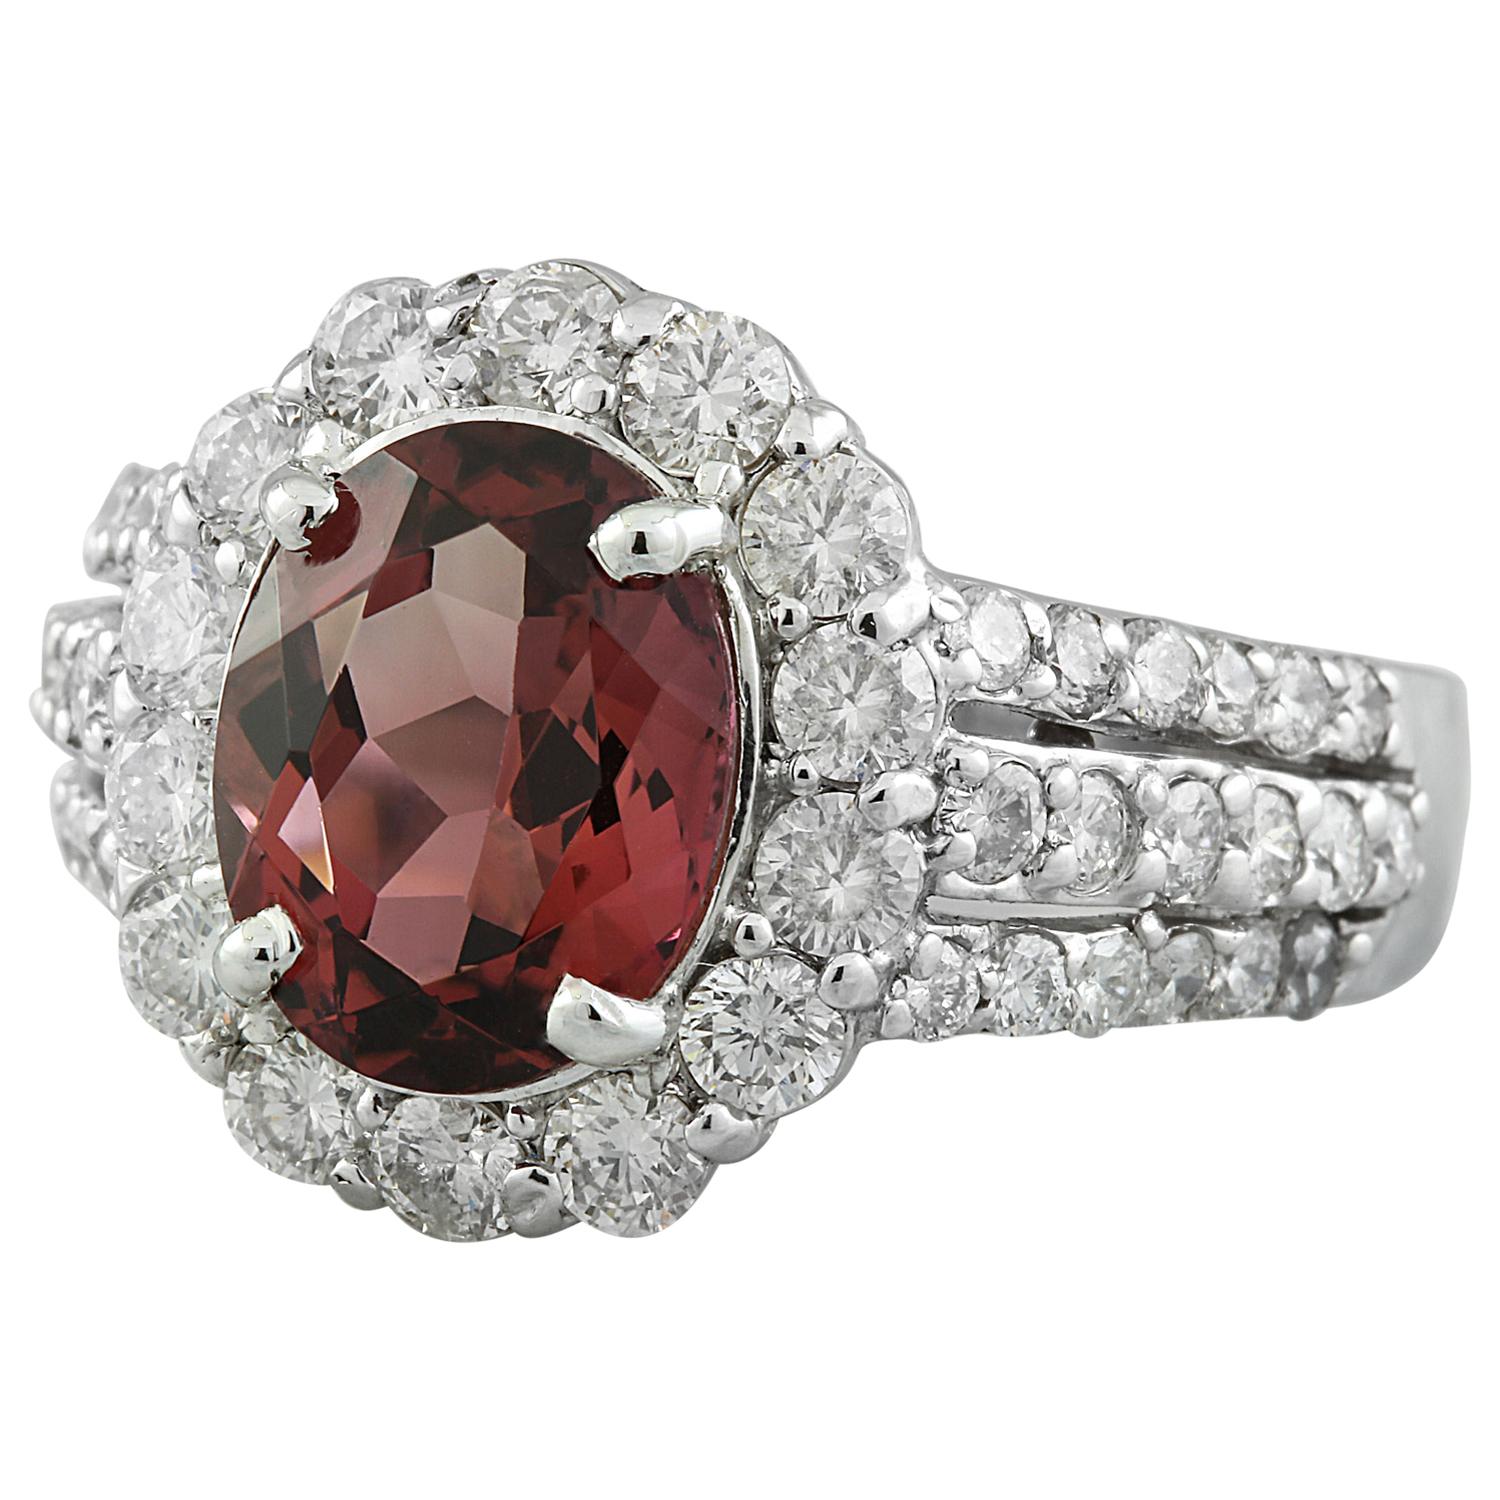 4.33 Carat Natural Tourmaline 14 Karat Solid White Gold Diamond Ring In New Condition For Sale In Los Angeles, CA